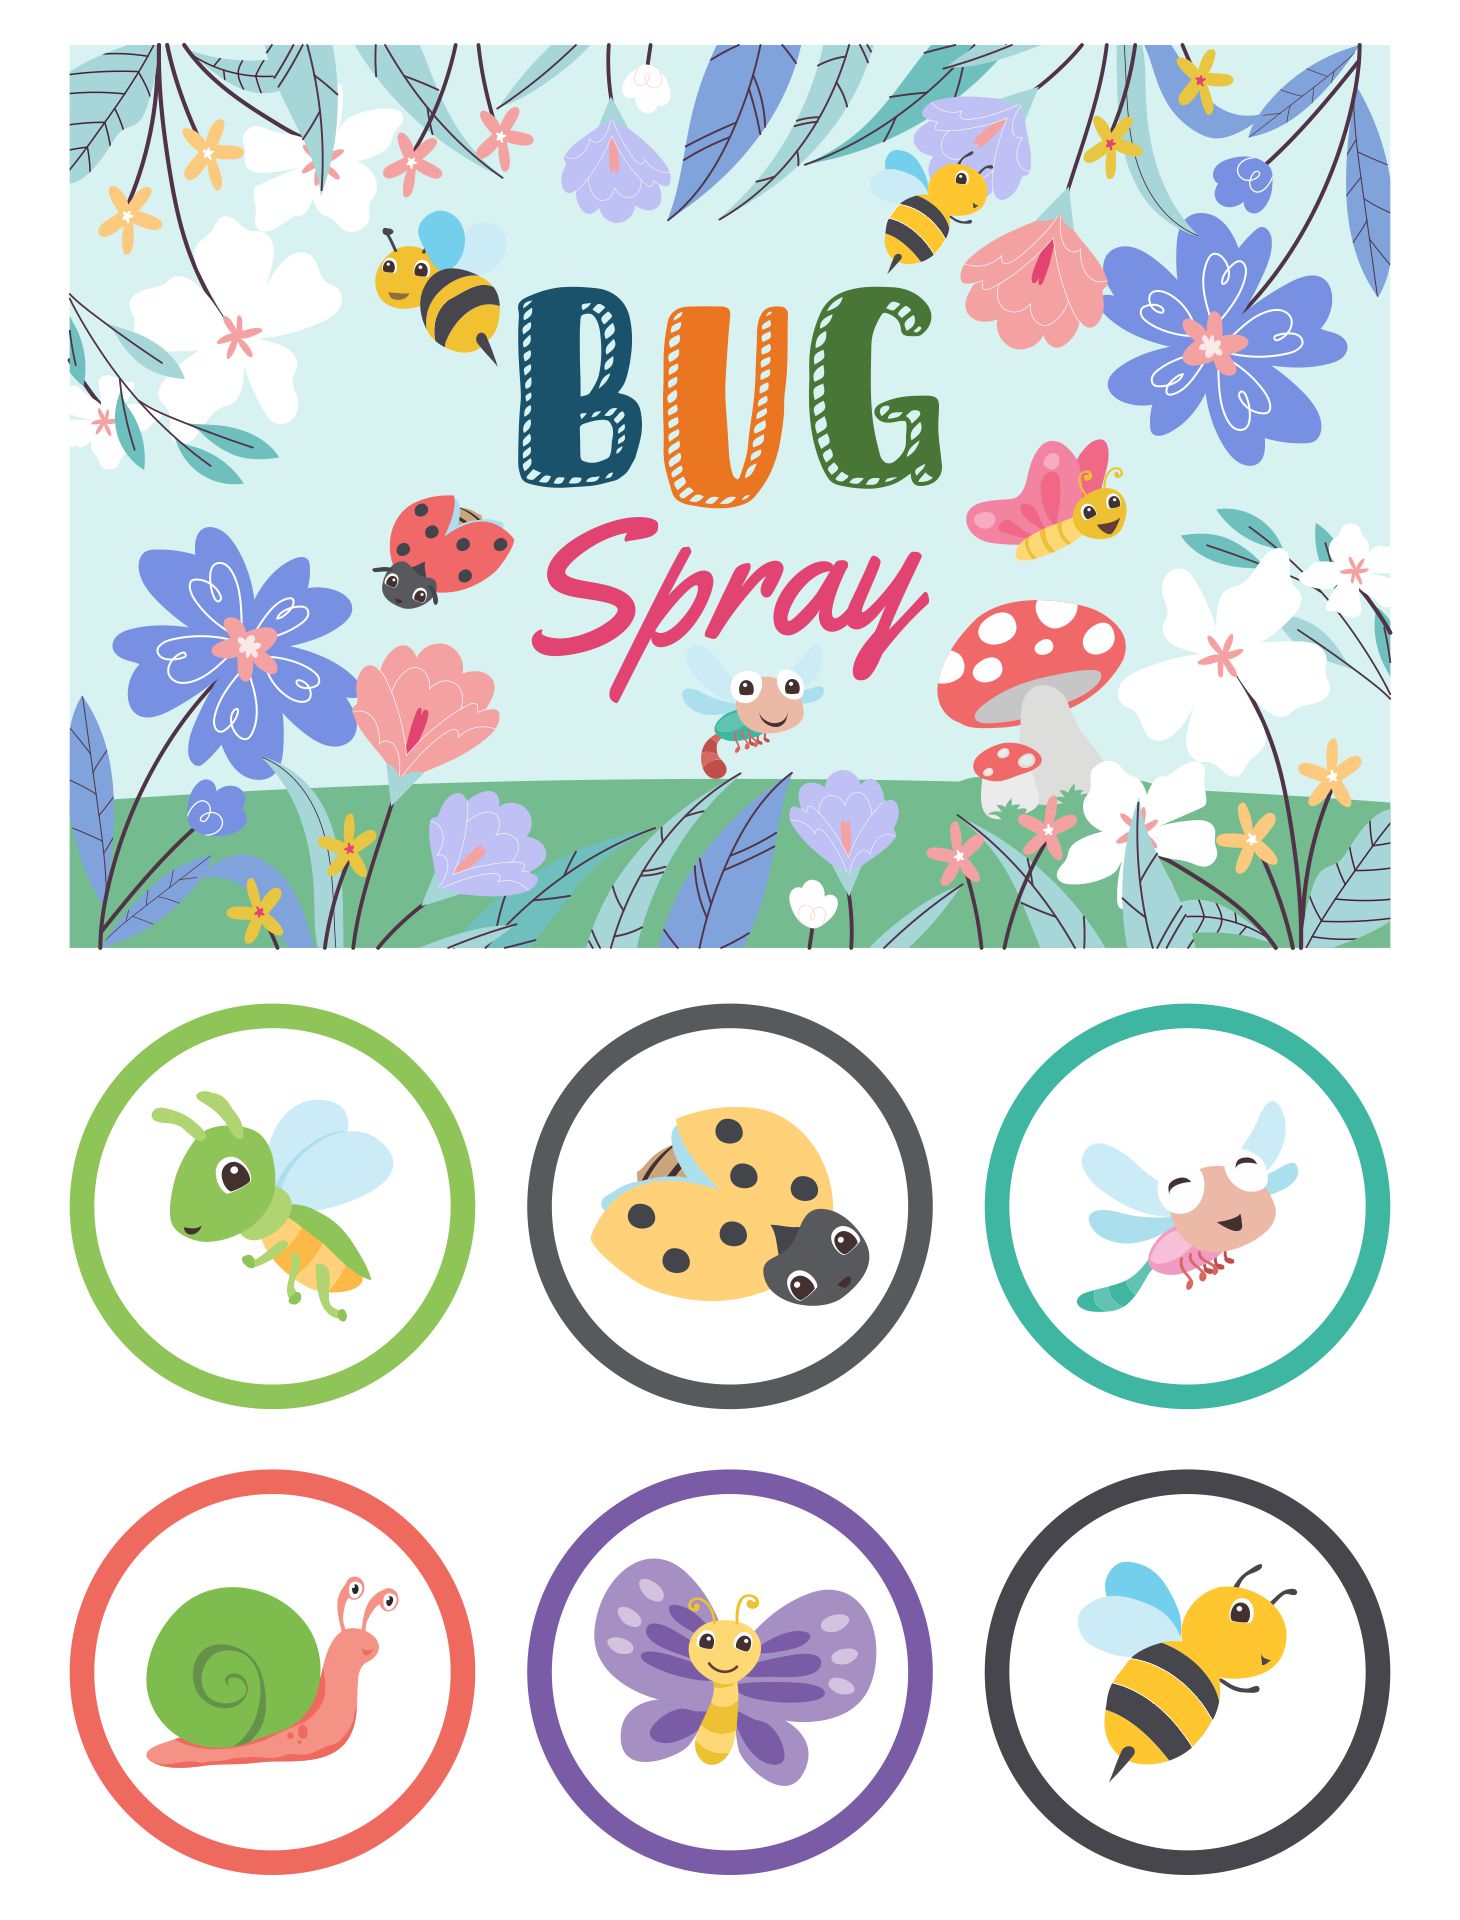 Silly String Bug Spray Label Printable Camping Party Favor